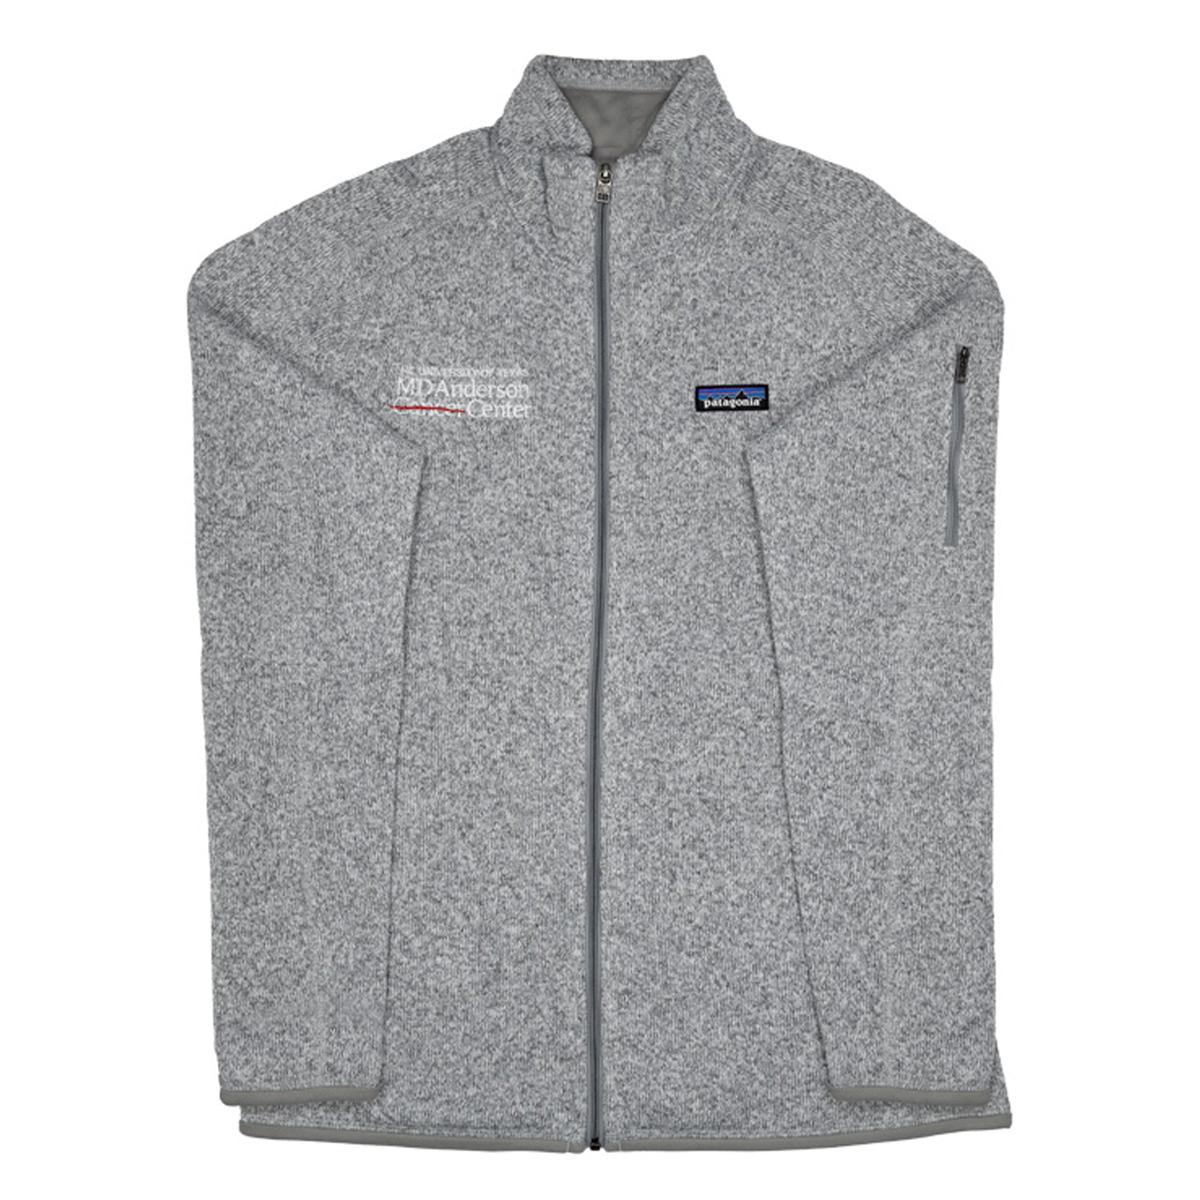 Grey Patagonia jacket with the white MD Anderson logo on the chest area.